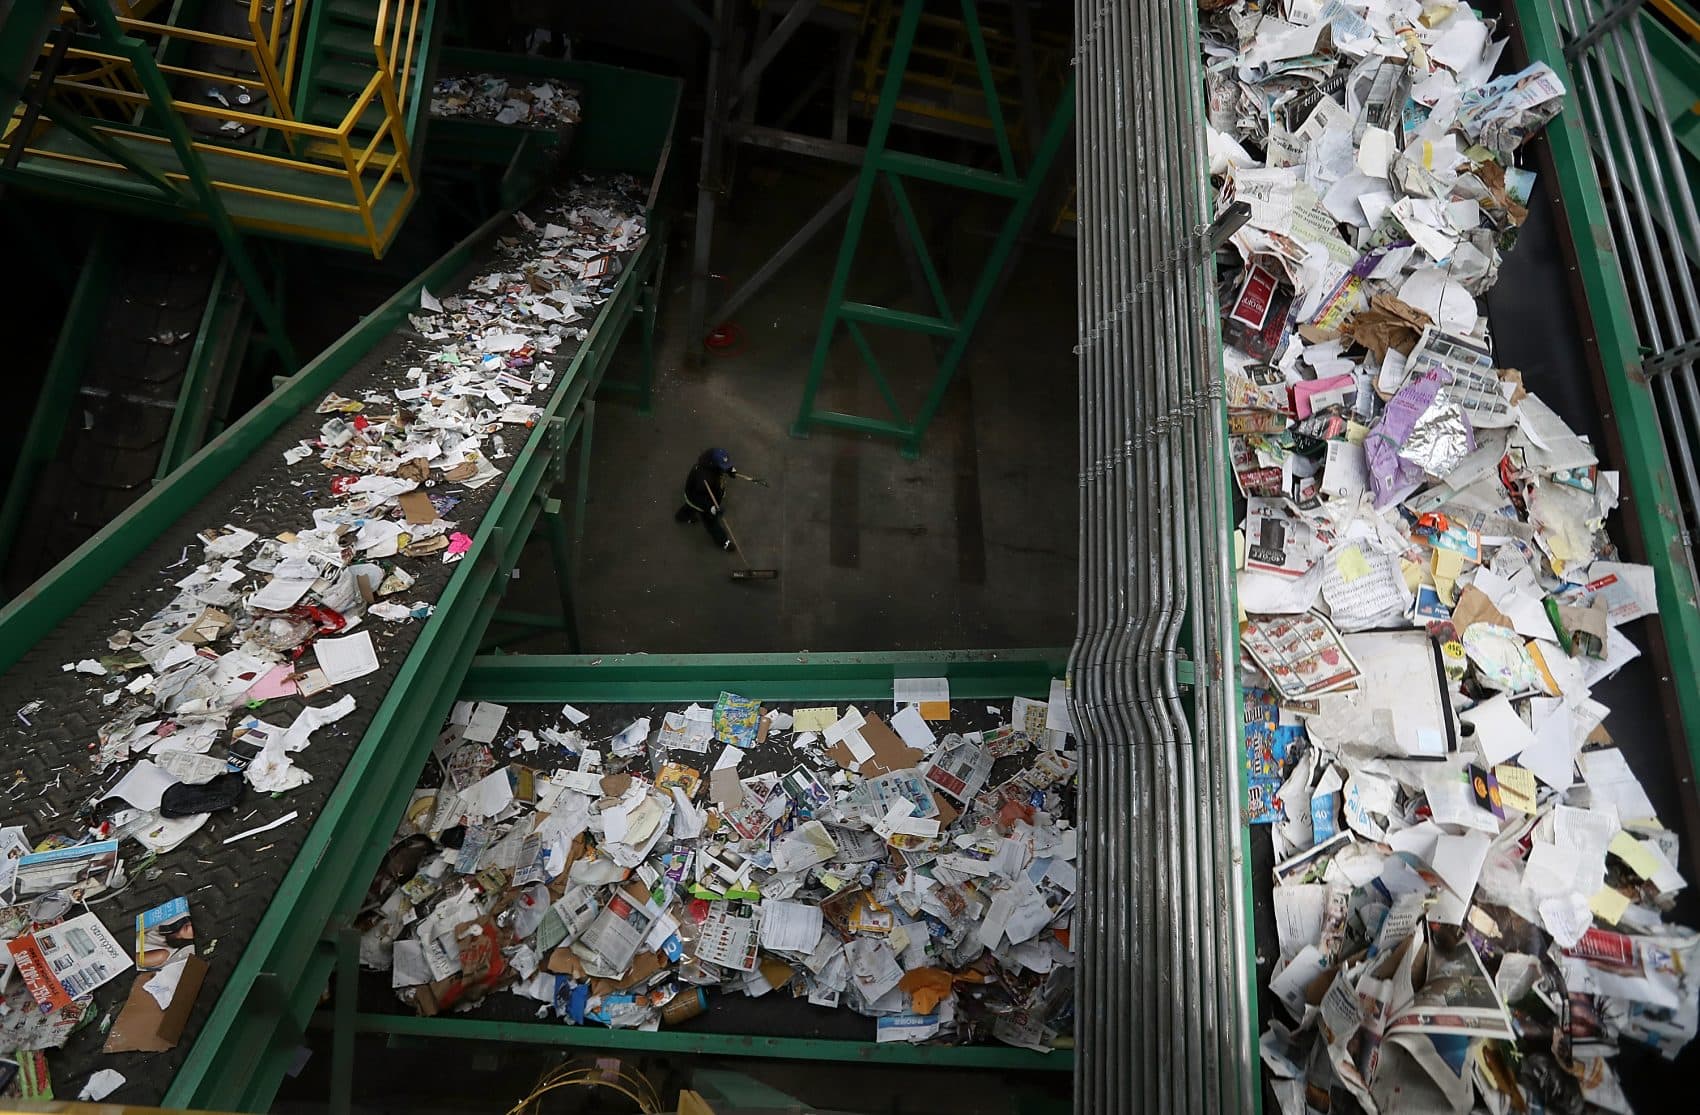 Conveyor belts carry recyclable materials through a sorting machine at Recology's Recycle Central in San Francisco. (Justin Sullivan/Getty Images)